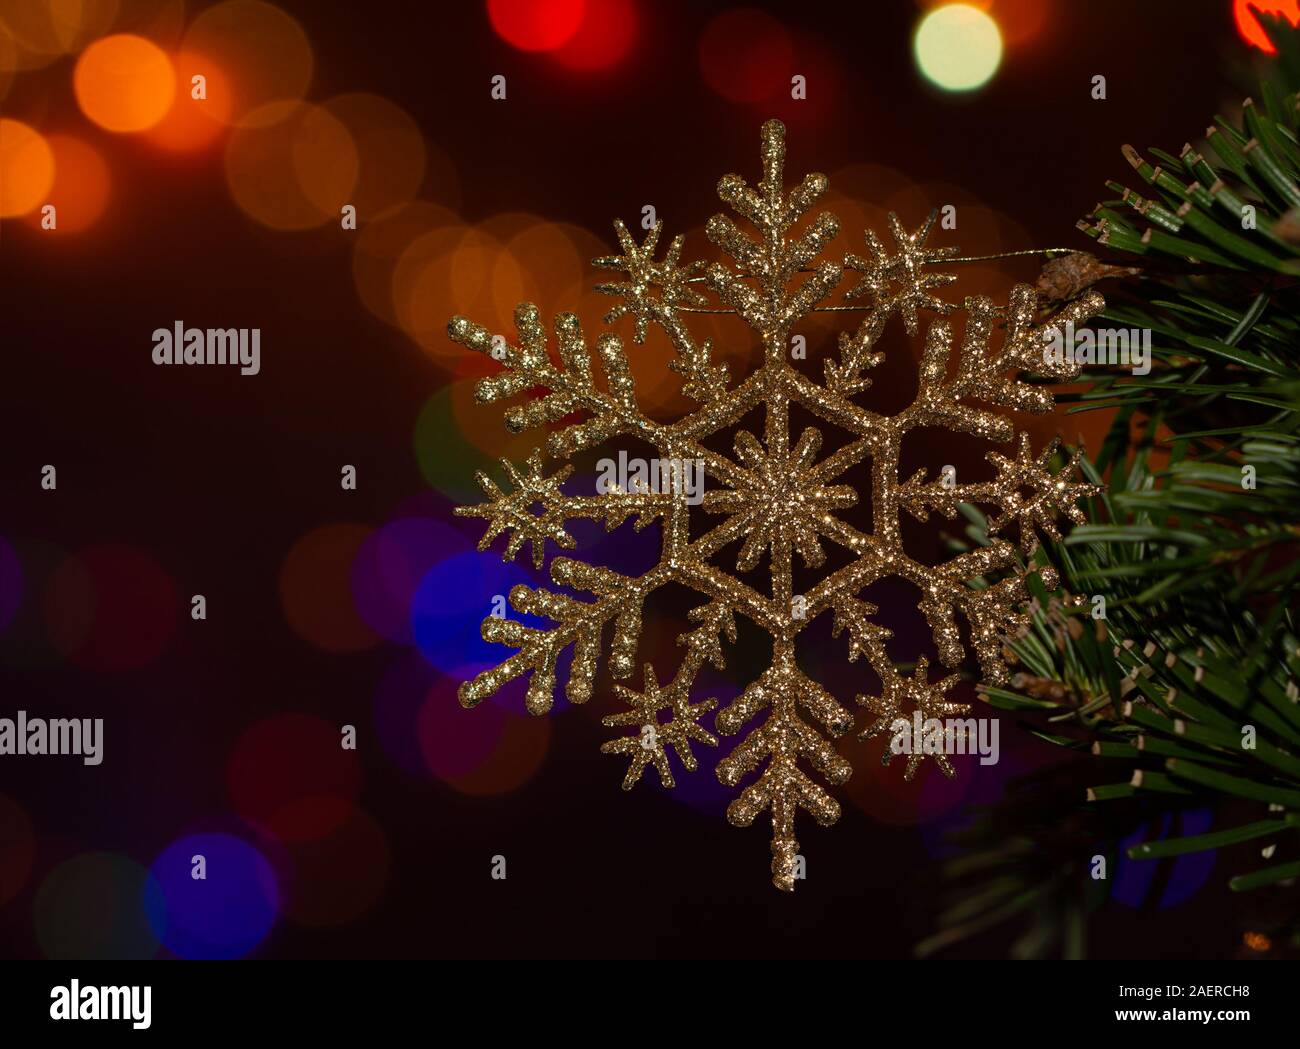 Gold colored glittery snowflake shaped Christmas ornament in tree, with bright colorful bokeh light background Stock Photo